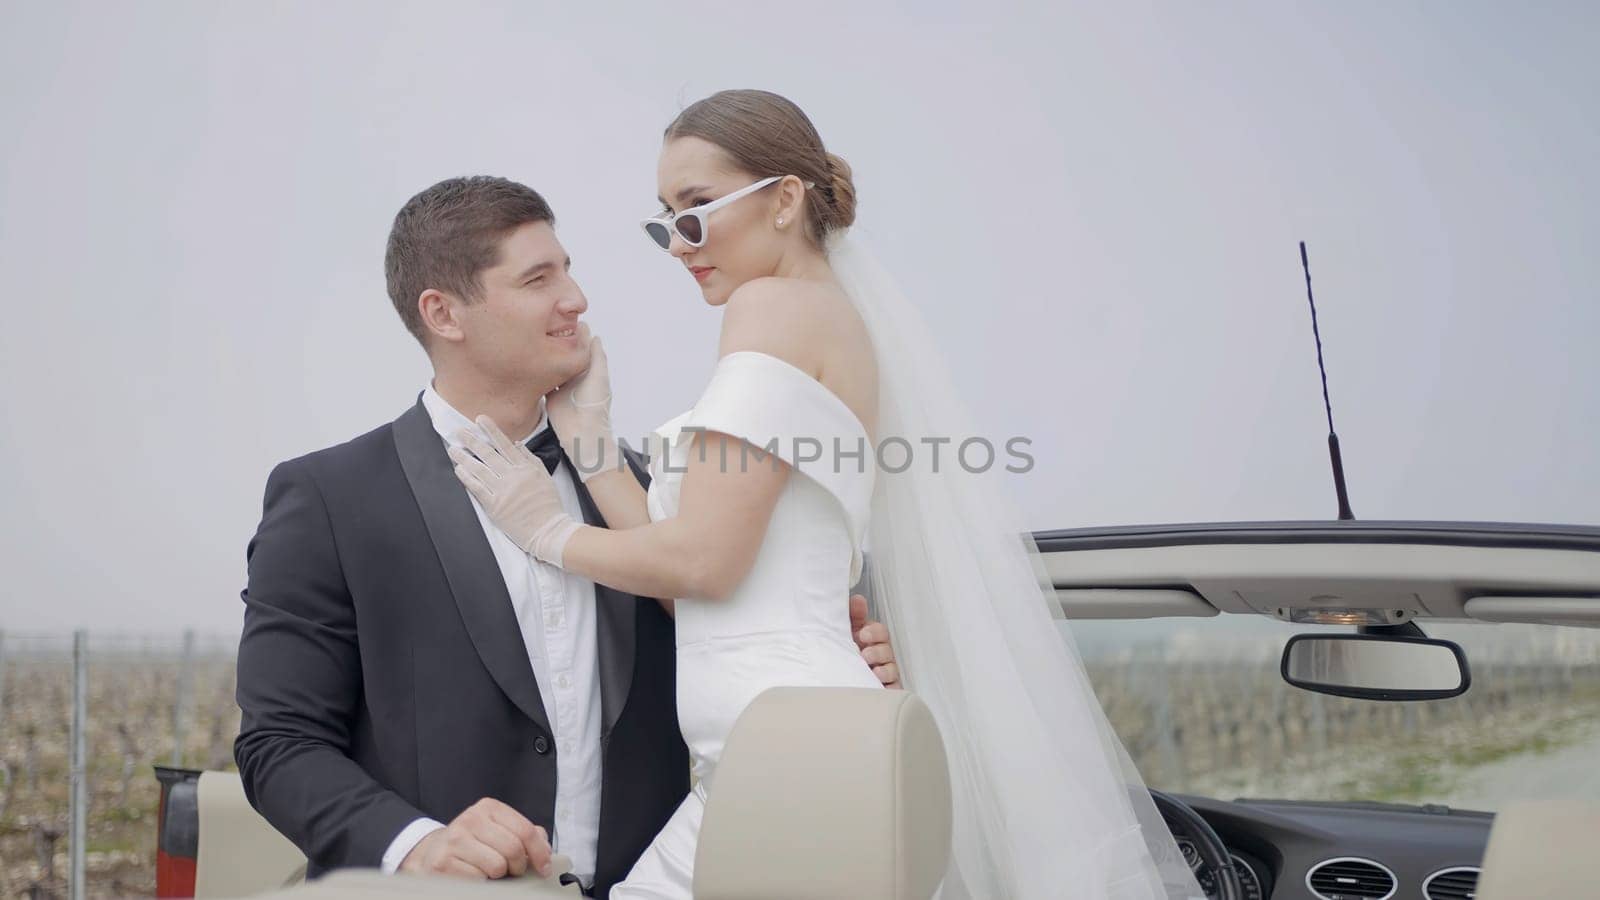 Just married couple, bride and groom in the open air. Action. Beautiful woman in white dress and sunglasses embracing man in suit while photosession in cabriolet